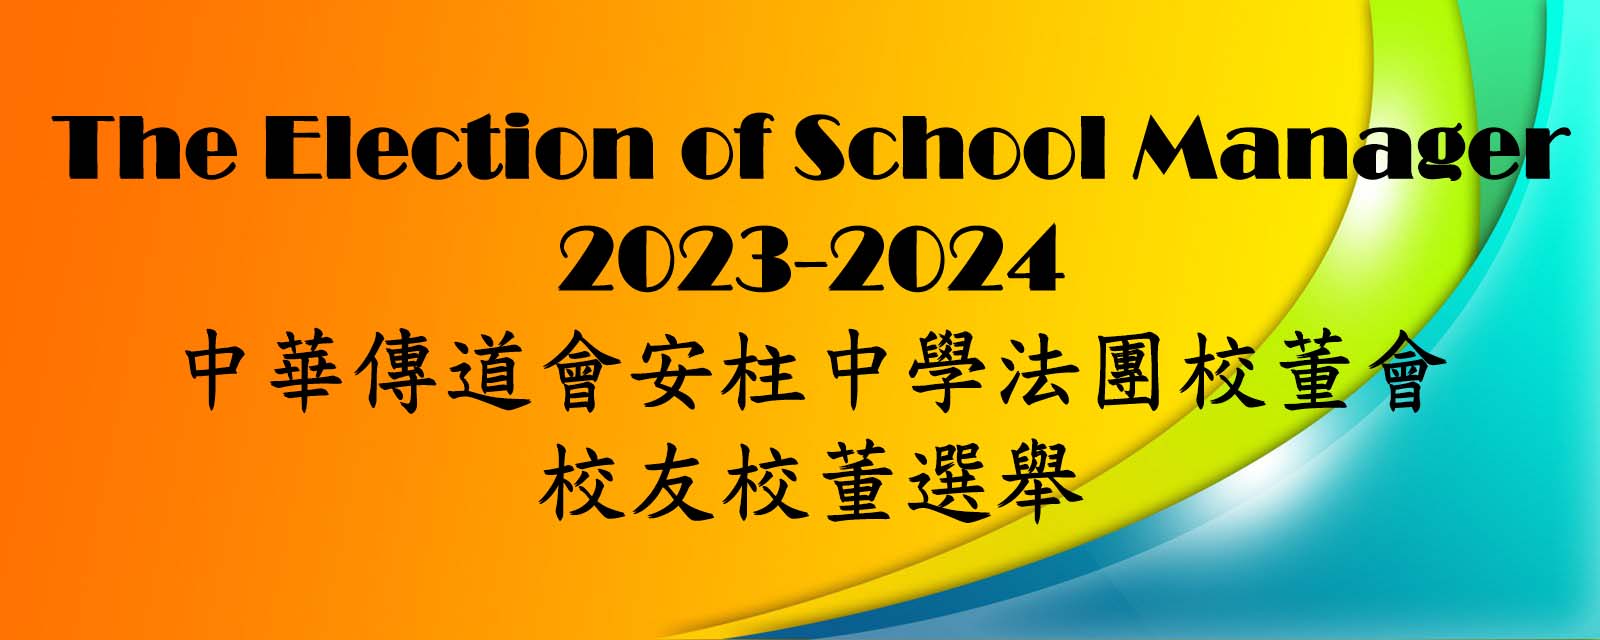 The Election of School Manager 2023-2024